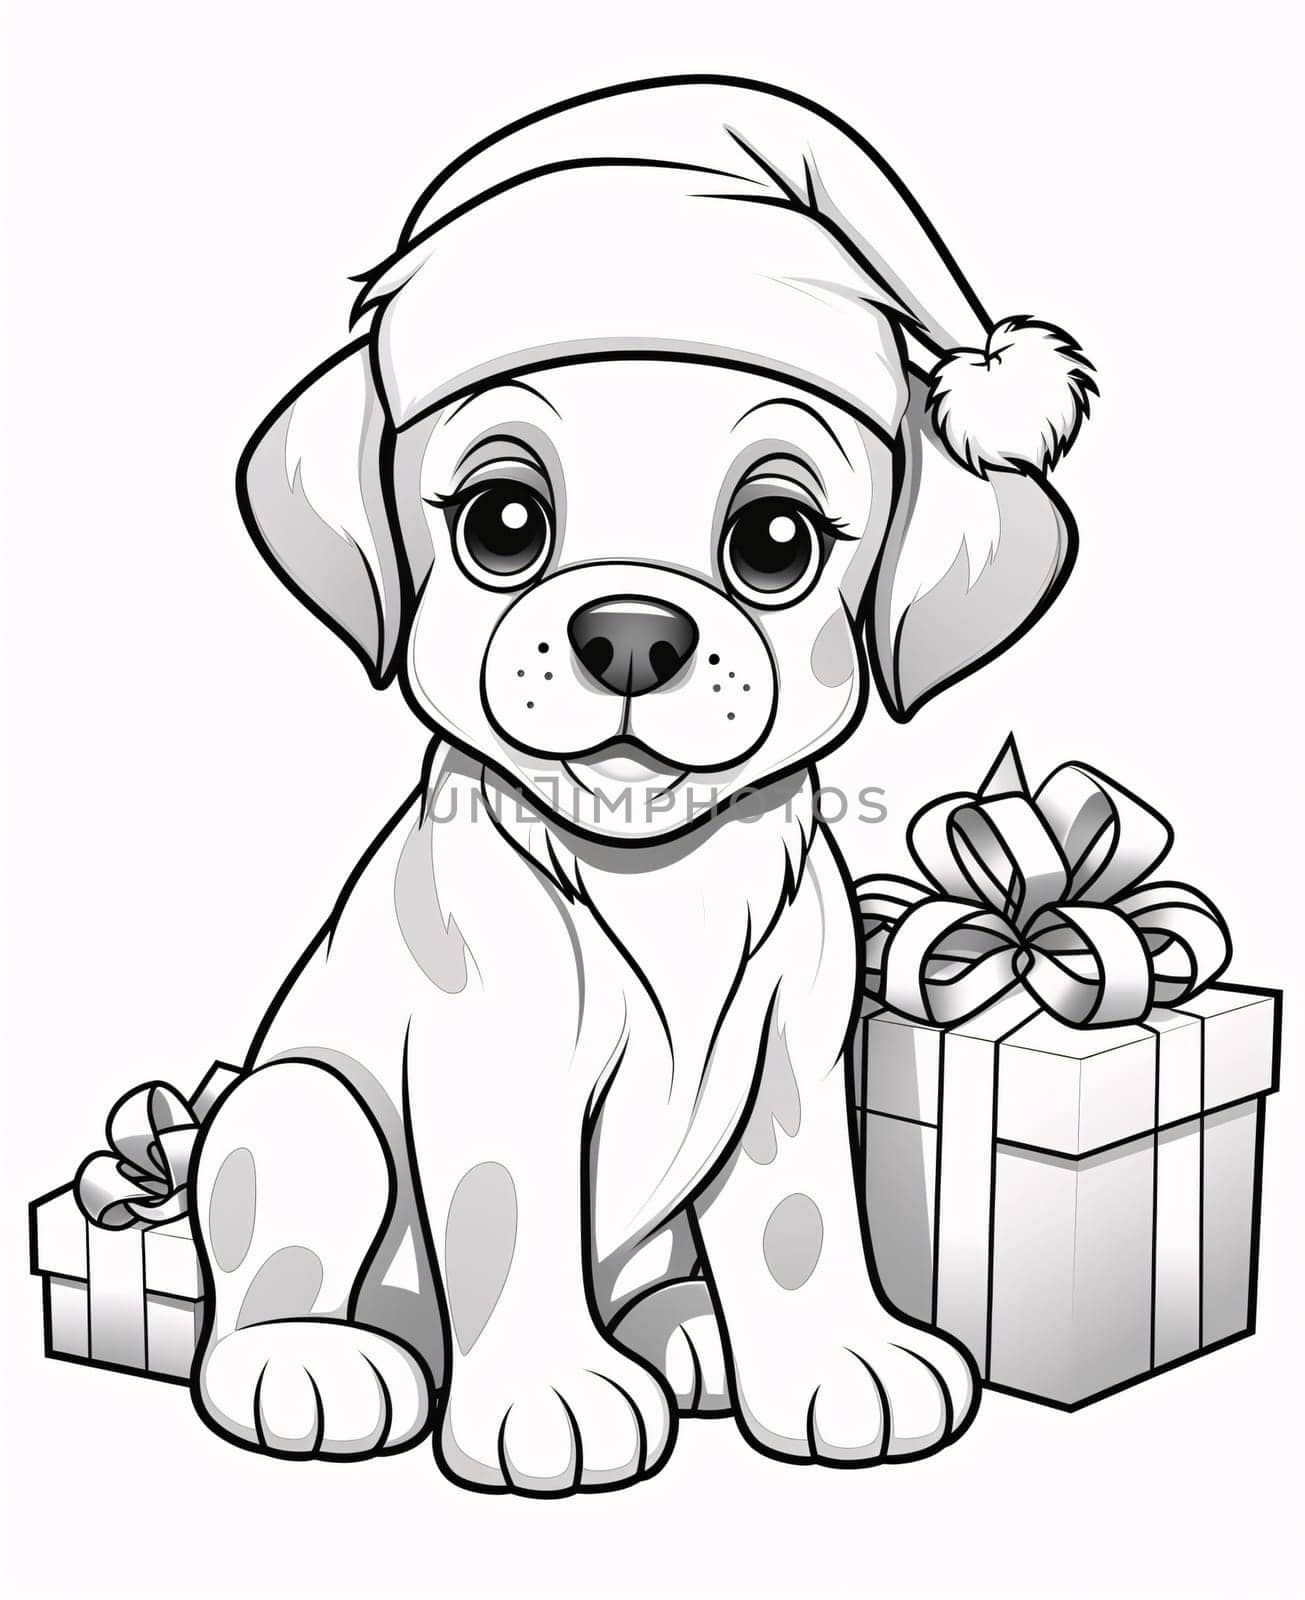 Black and white coloring card: doggie and gifts with bows. Gifts as a day symbol of present and love. by ThemesS